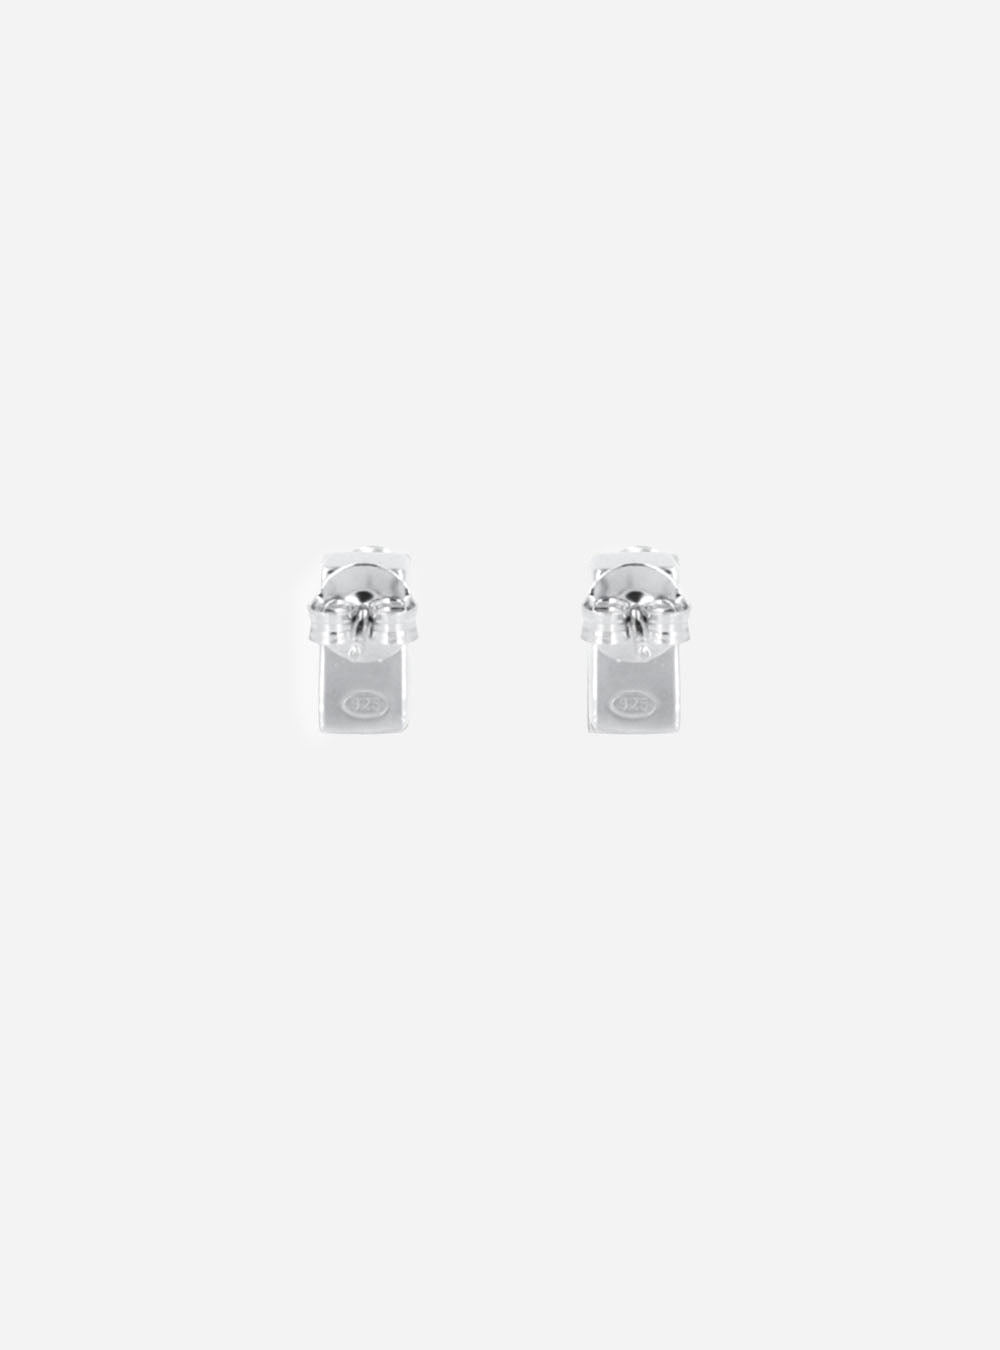 a pair of MIDNIGHTFACTORY Screwbox spinel earrings on a white background.